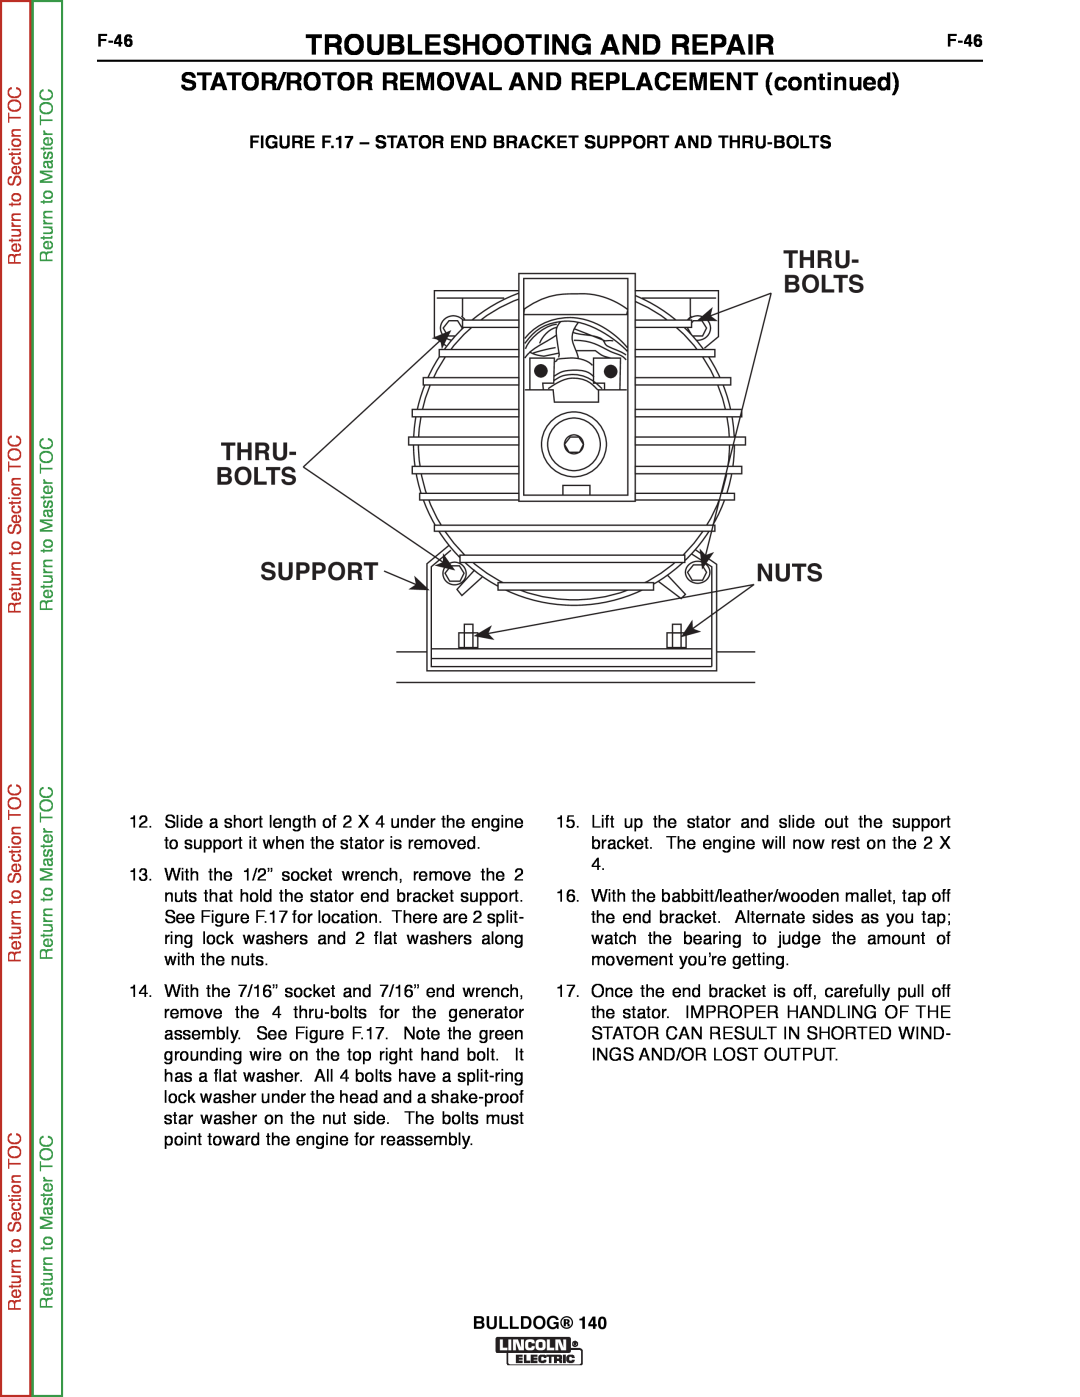 Lincoln Electric SVM208-A service manual Thru Bolts Thru Bolts, Support, Nuts, Troubleshooting And Repair, F-46, Bulldog 